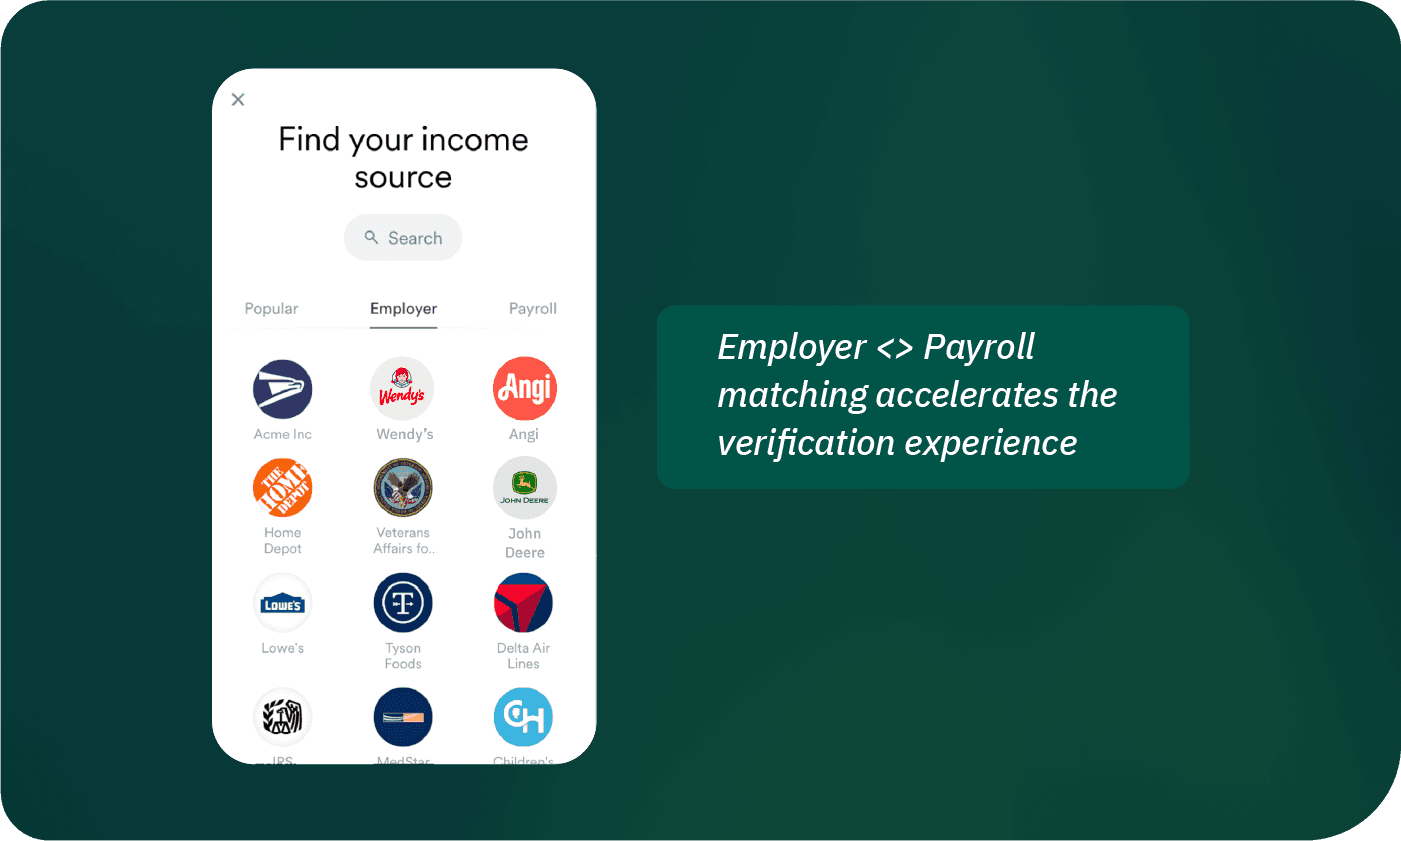 Employer <> Payroll matching accelerates the verification experience